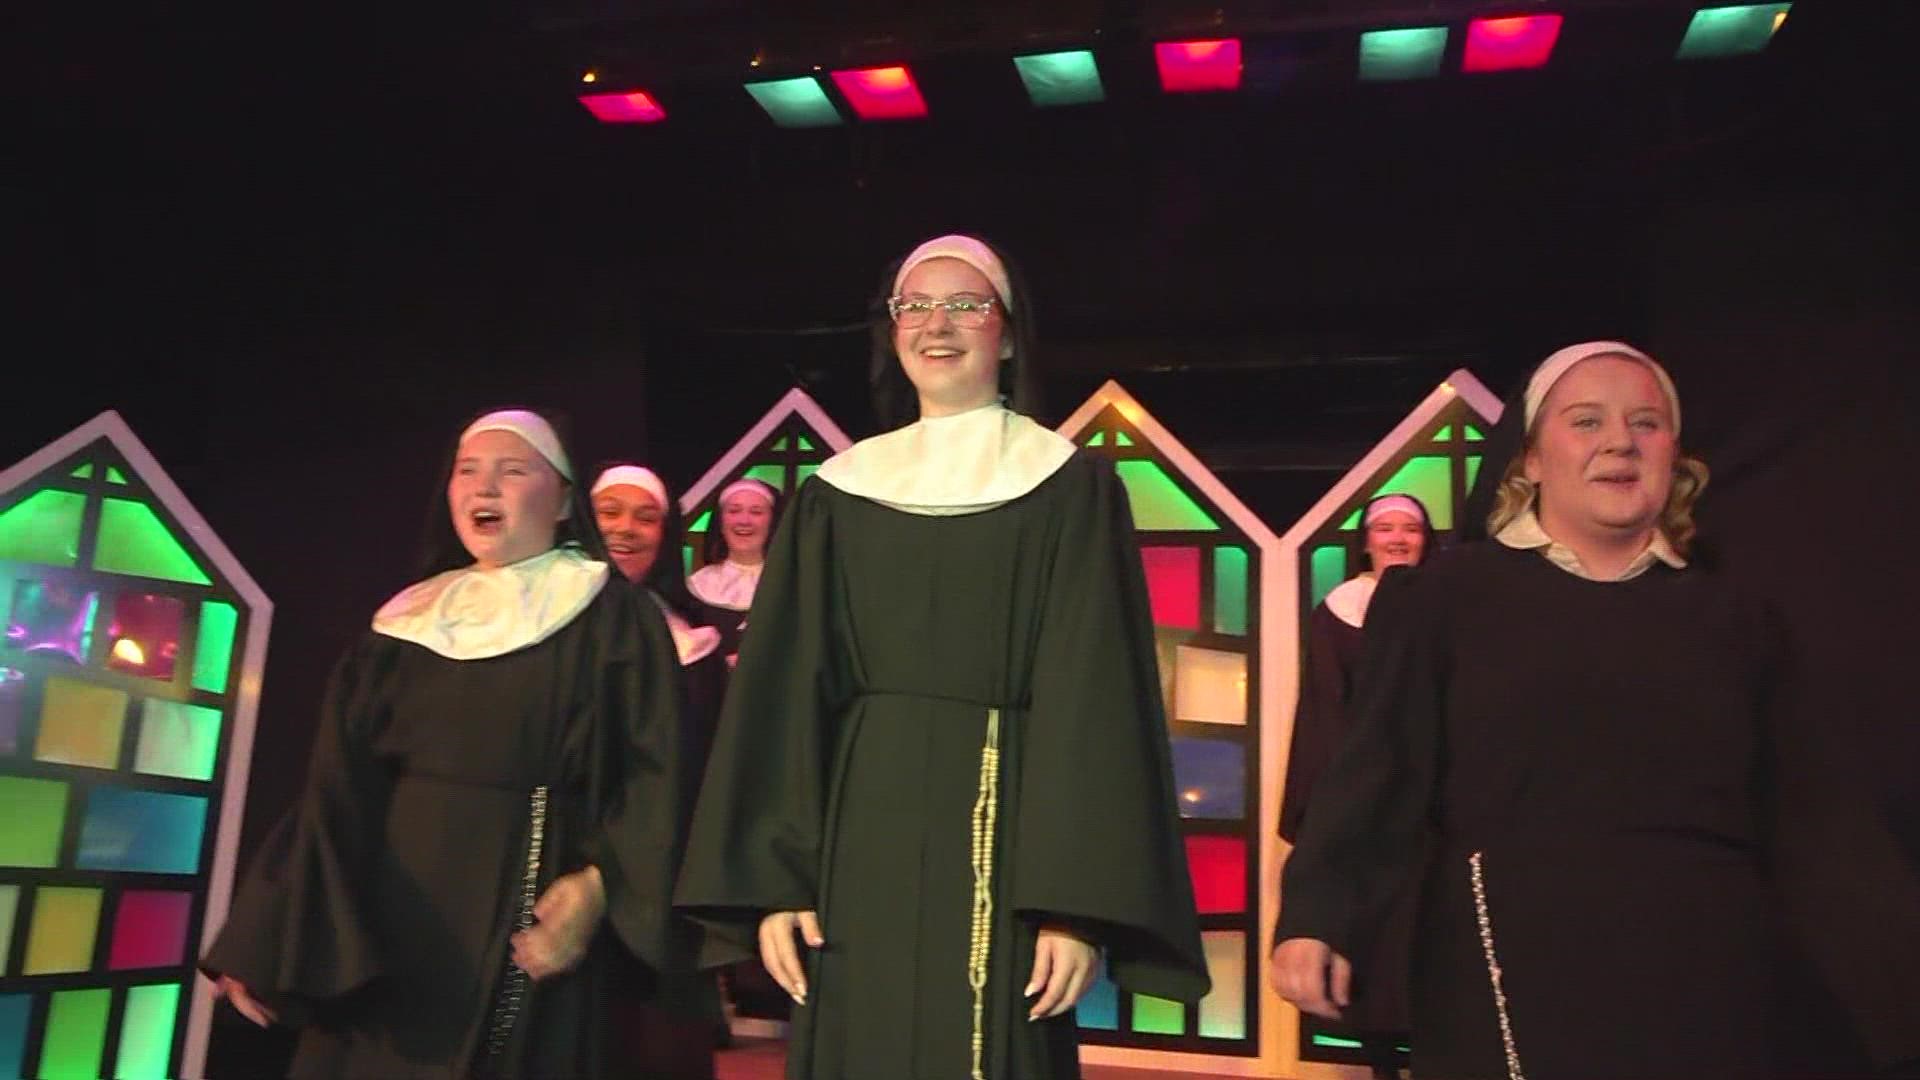 Take a trip to the convent to see the classic movie adapted for the stage in 'Sister Act Jr.' at the Knoxville Children's Theatre, running July 8-24, 2022.